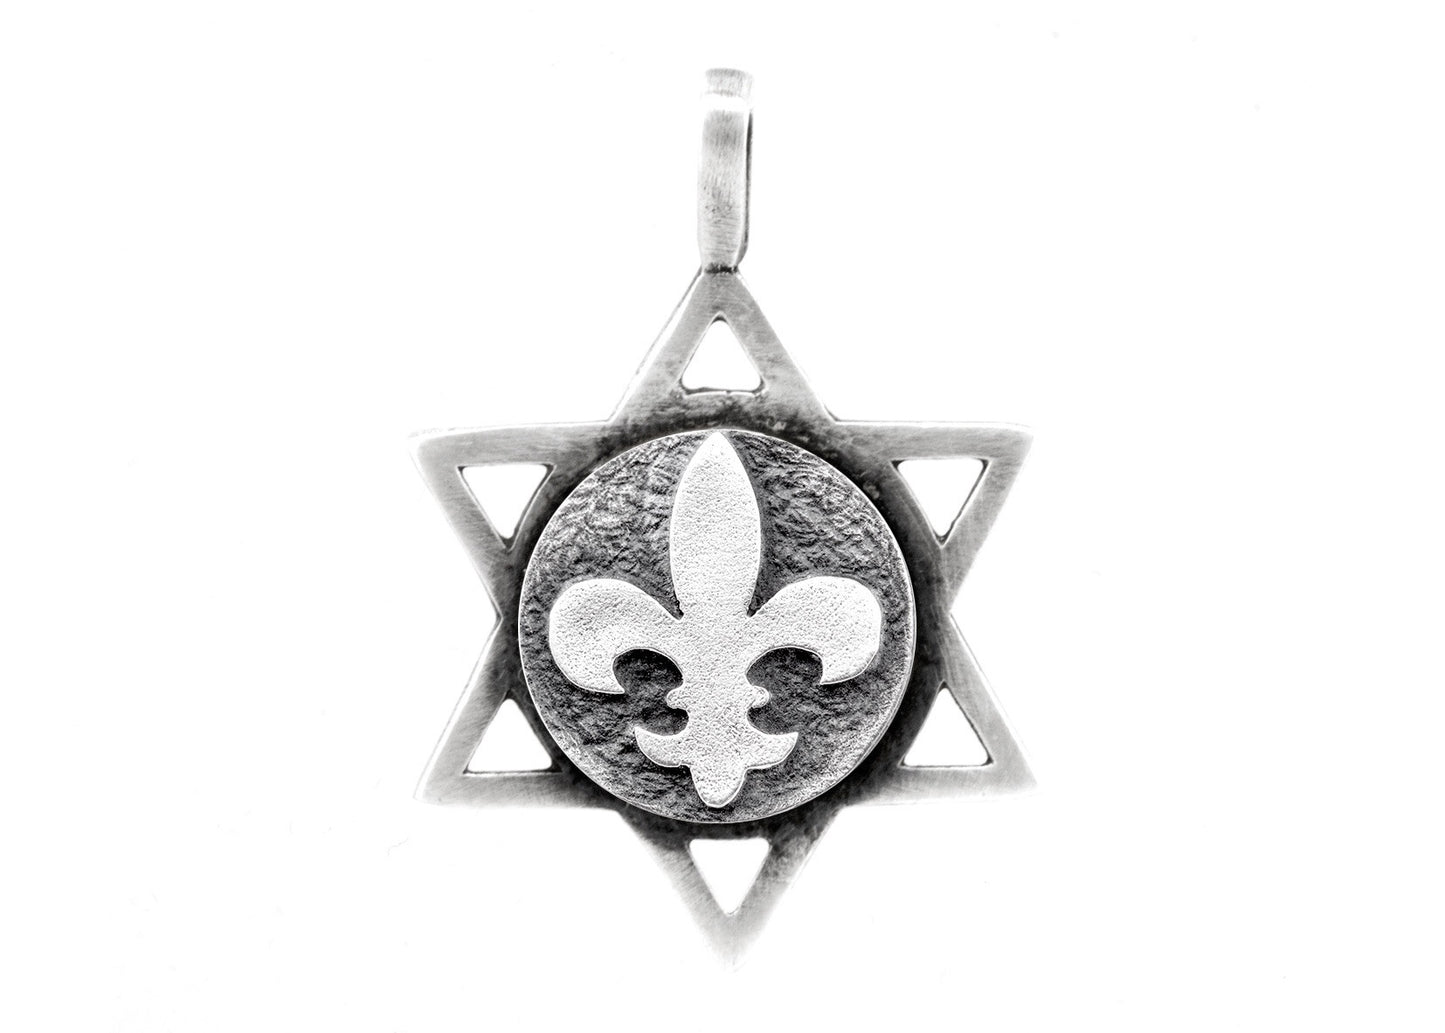 Star of David with White Lily Medallion